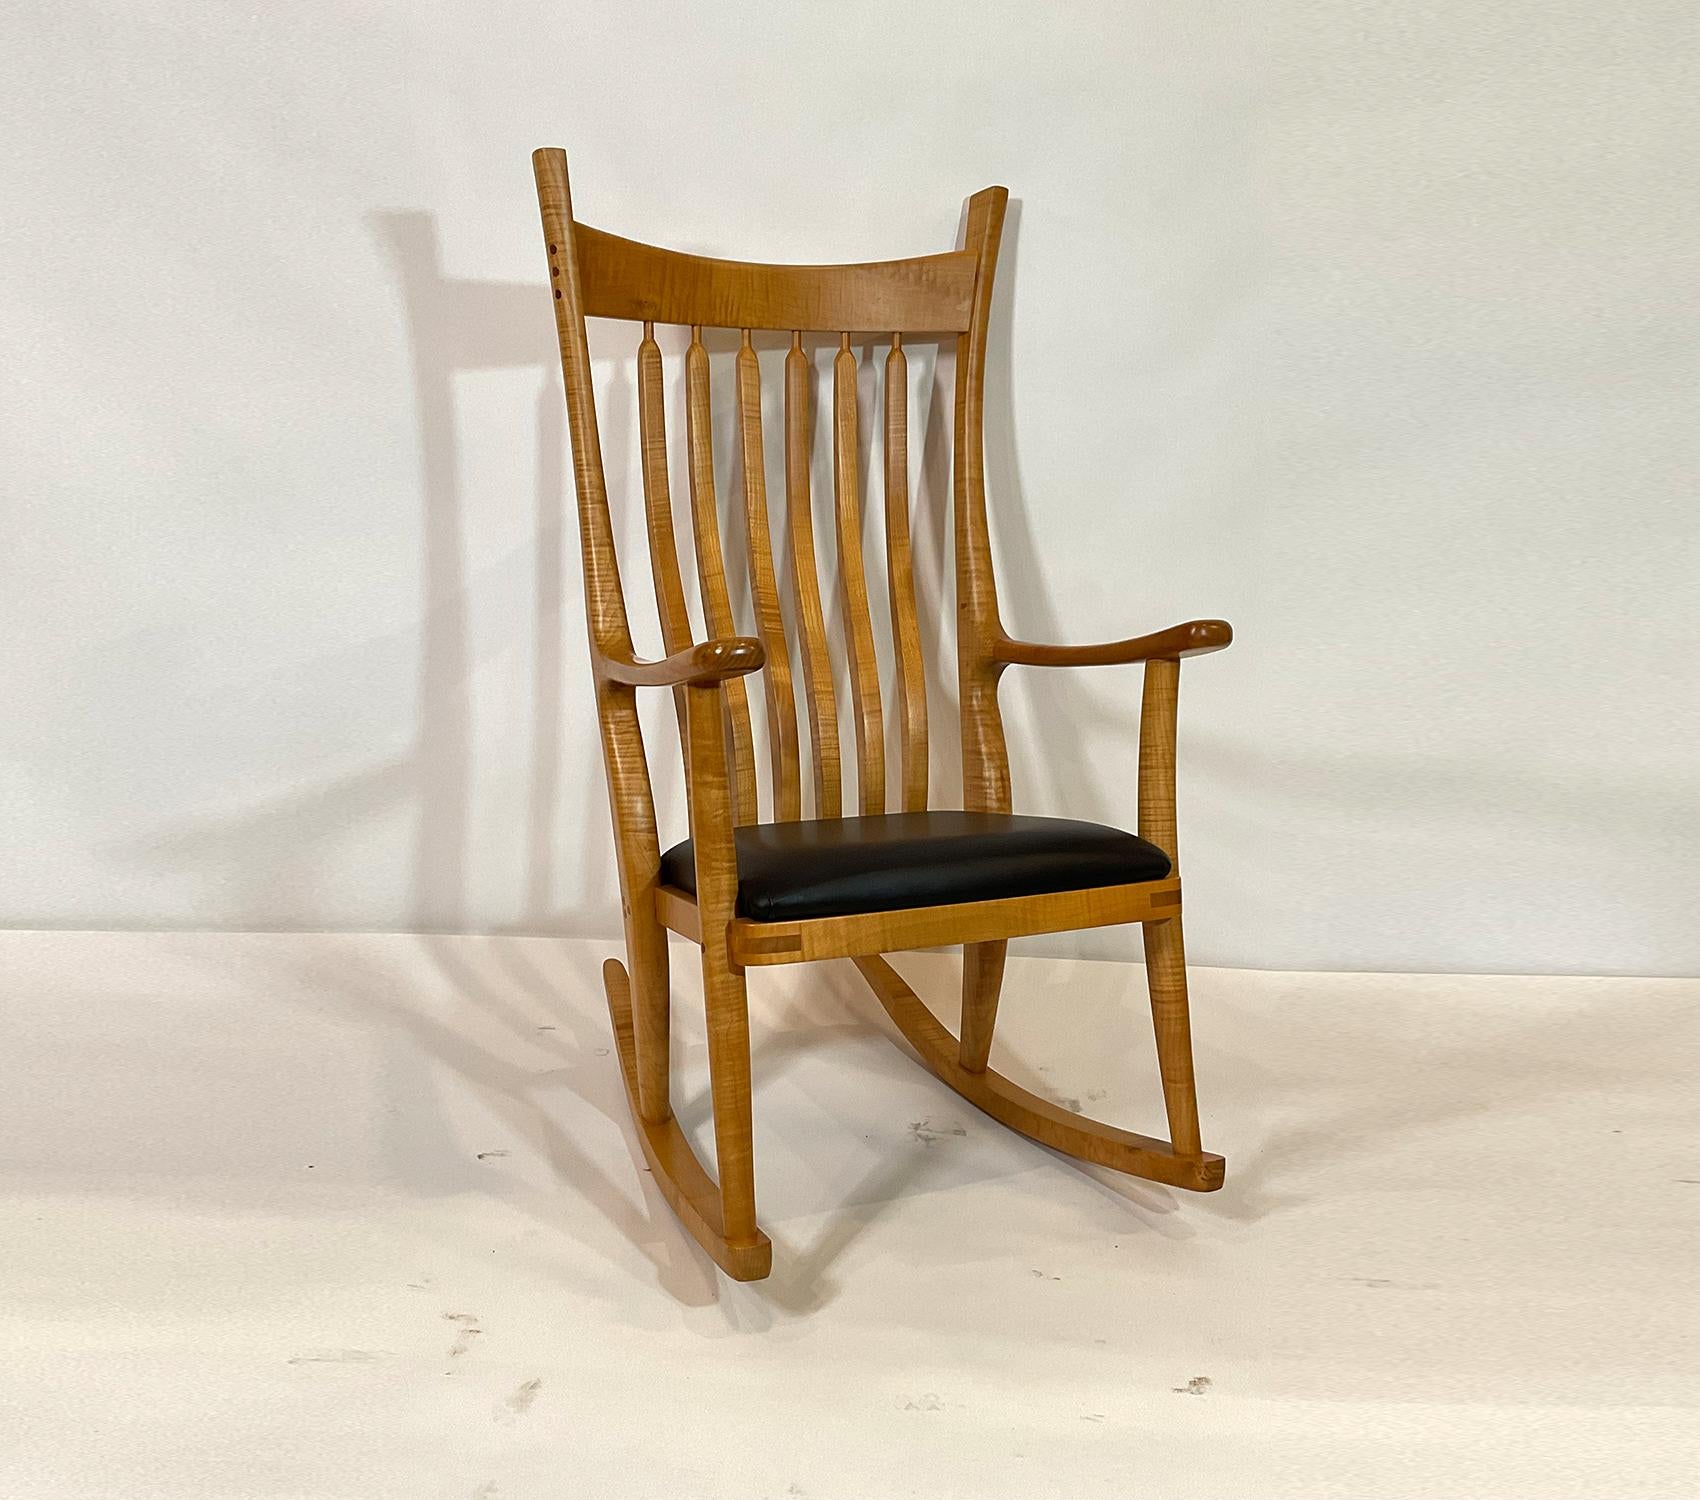 Custom-made rocking chair by an expert custom furniture maker. Graceful lines, excellent lumber with beautiful grains. Study the pictures. Marked with maker’s name. Leather seat cover.

Weight: 28 LBS
Overall Dimensions: 47” H x 25” L x 31”